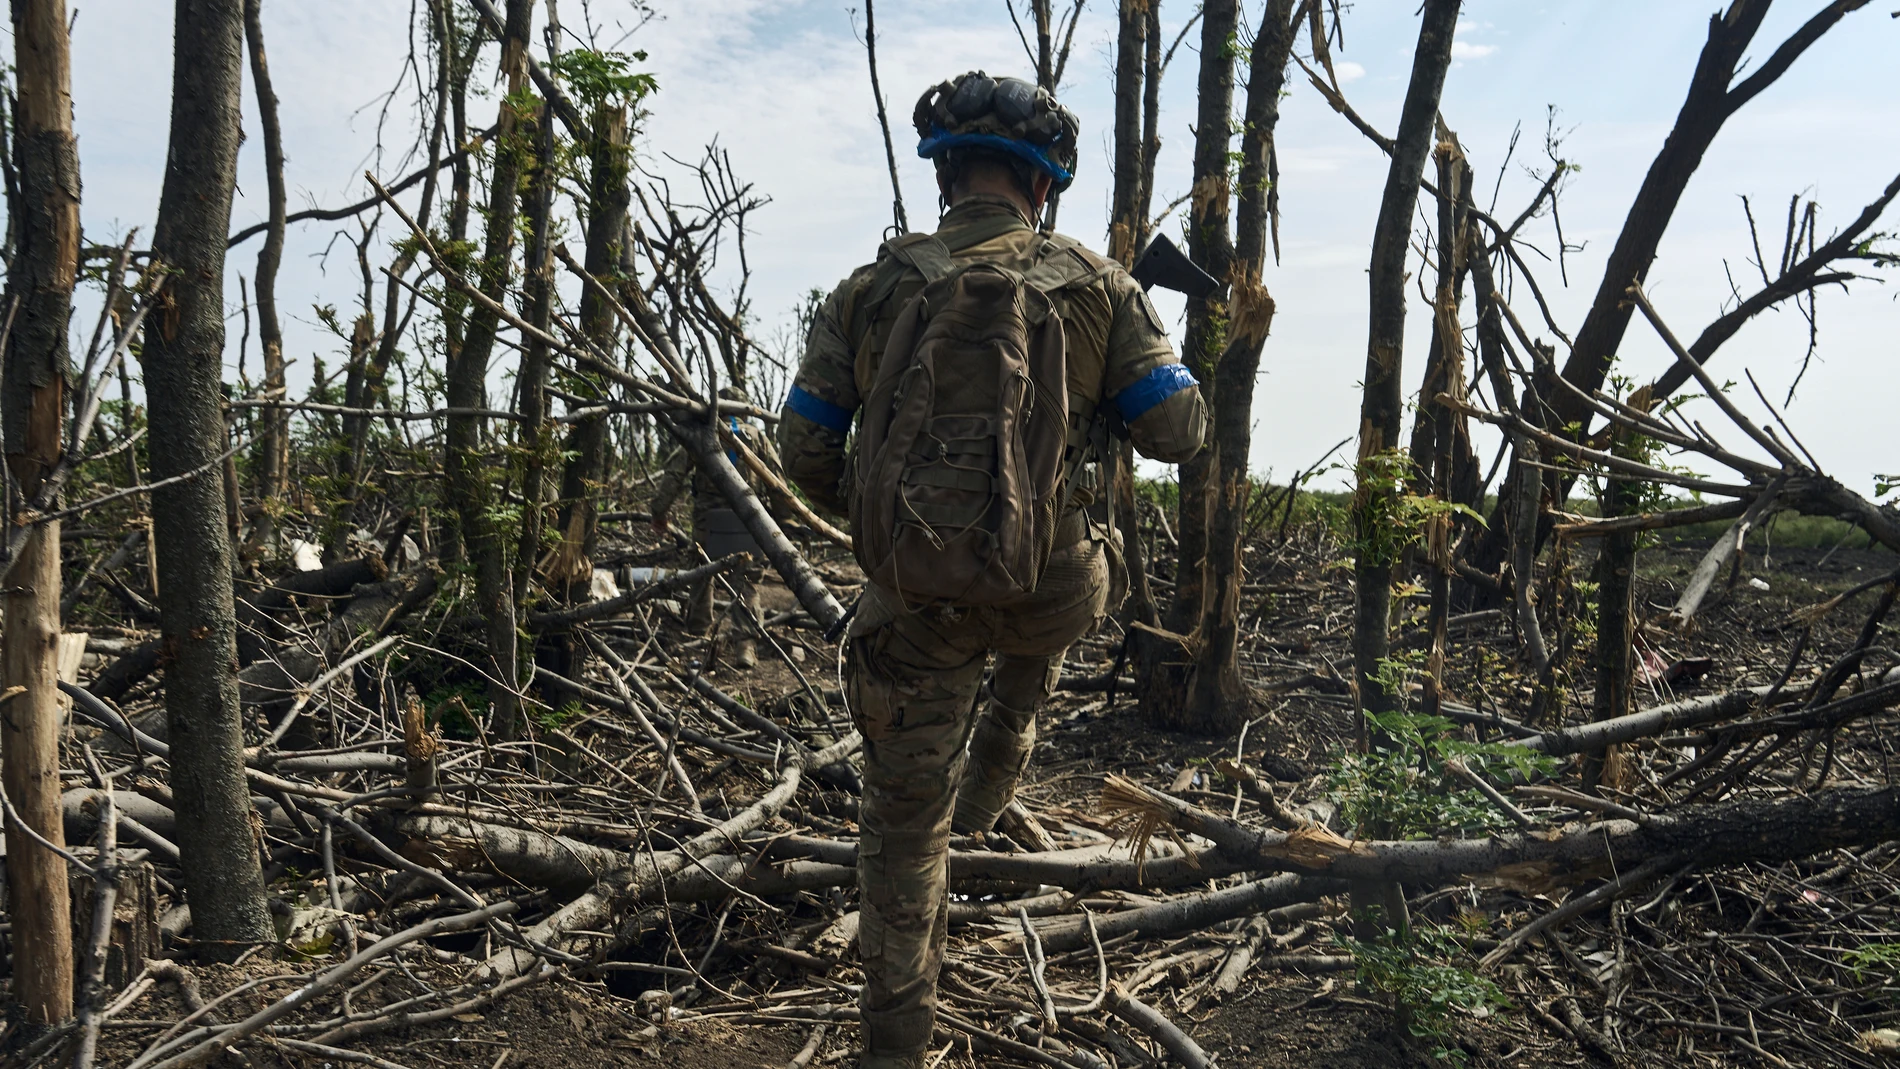 A soldier of Ukraine's 3rd Separate Assault Brigade goes on his position near Bakhmut, the site of fierce battles with the Russian forces in the Donetsk region, Ukraine, Monday, Sept. 4, 2023. (AP Photo/Libkos)